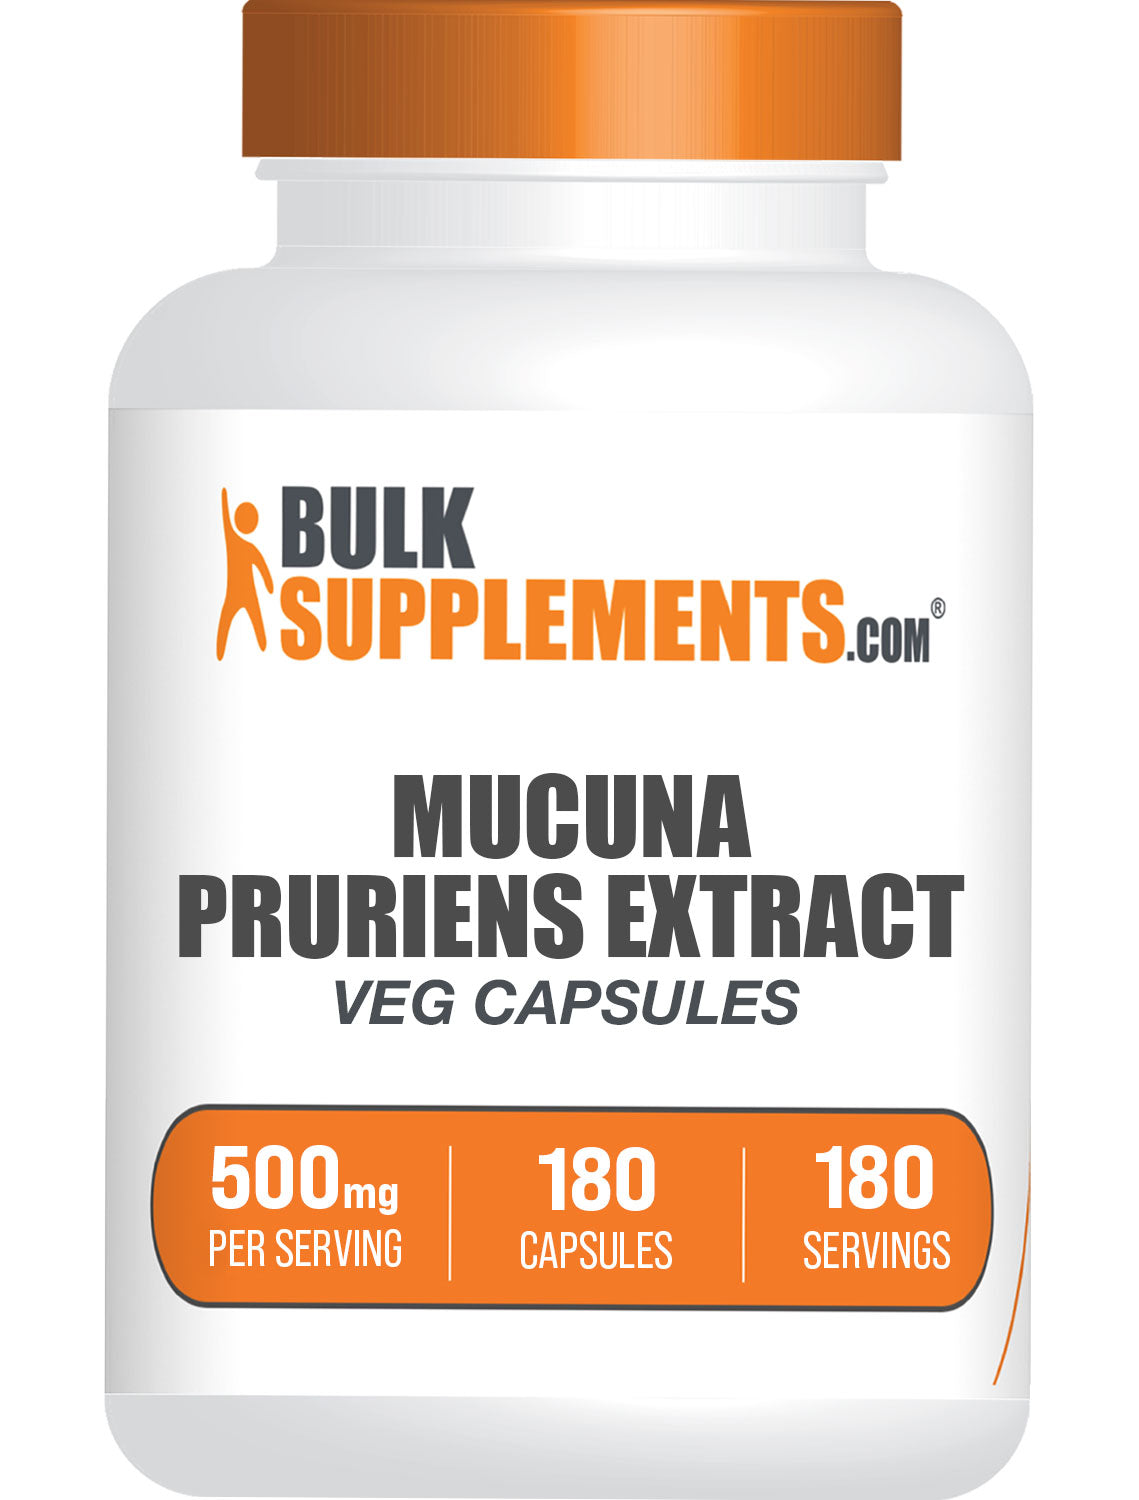 BulkSupplements Mucuna Pruriens Extract Vegetarian Capsules 500mg 180 capsules bottle